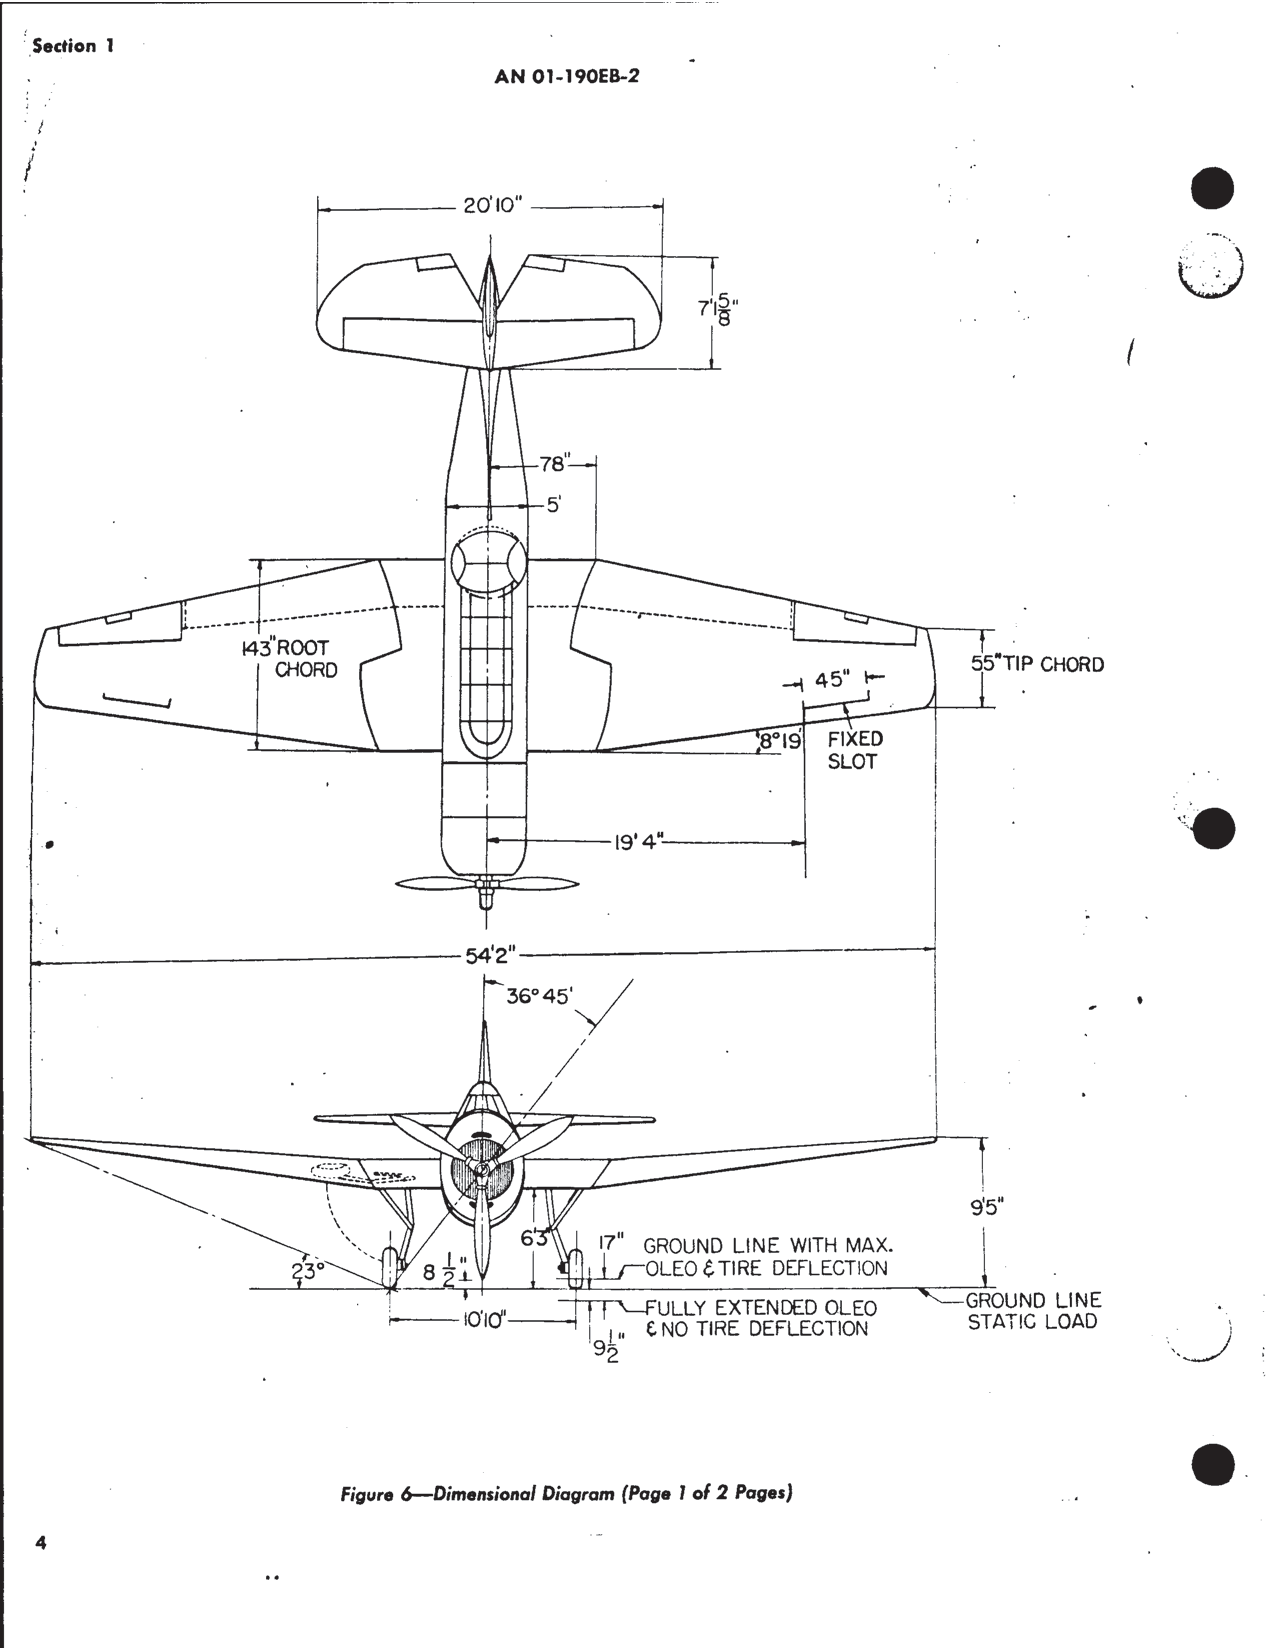 Sample page 14 from AirCorps Library document: Erection and Maintenance Handbook TBM-3